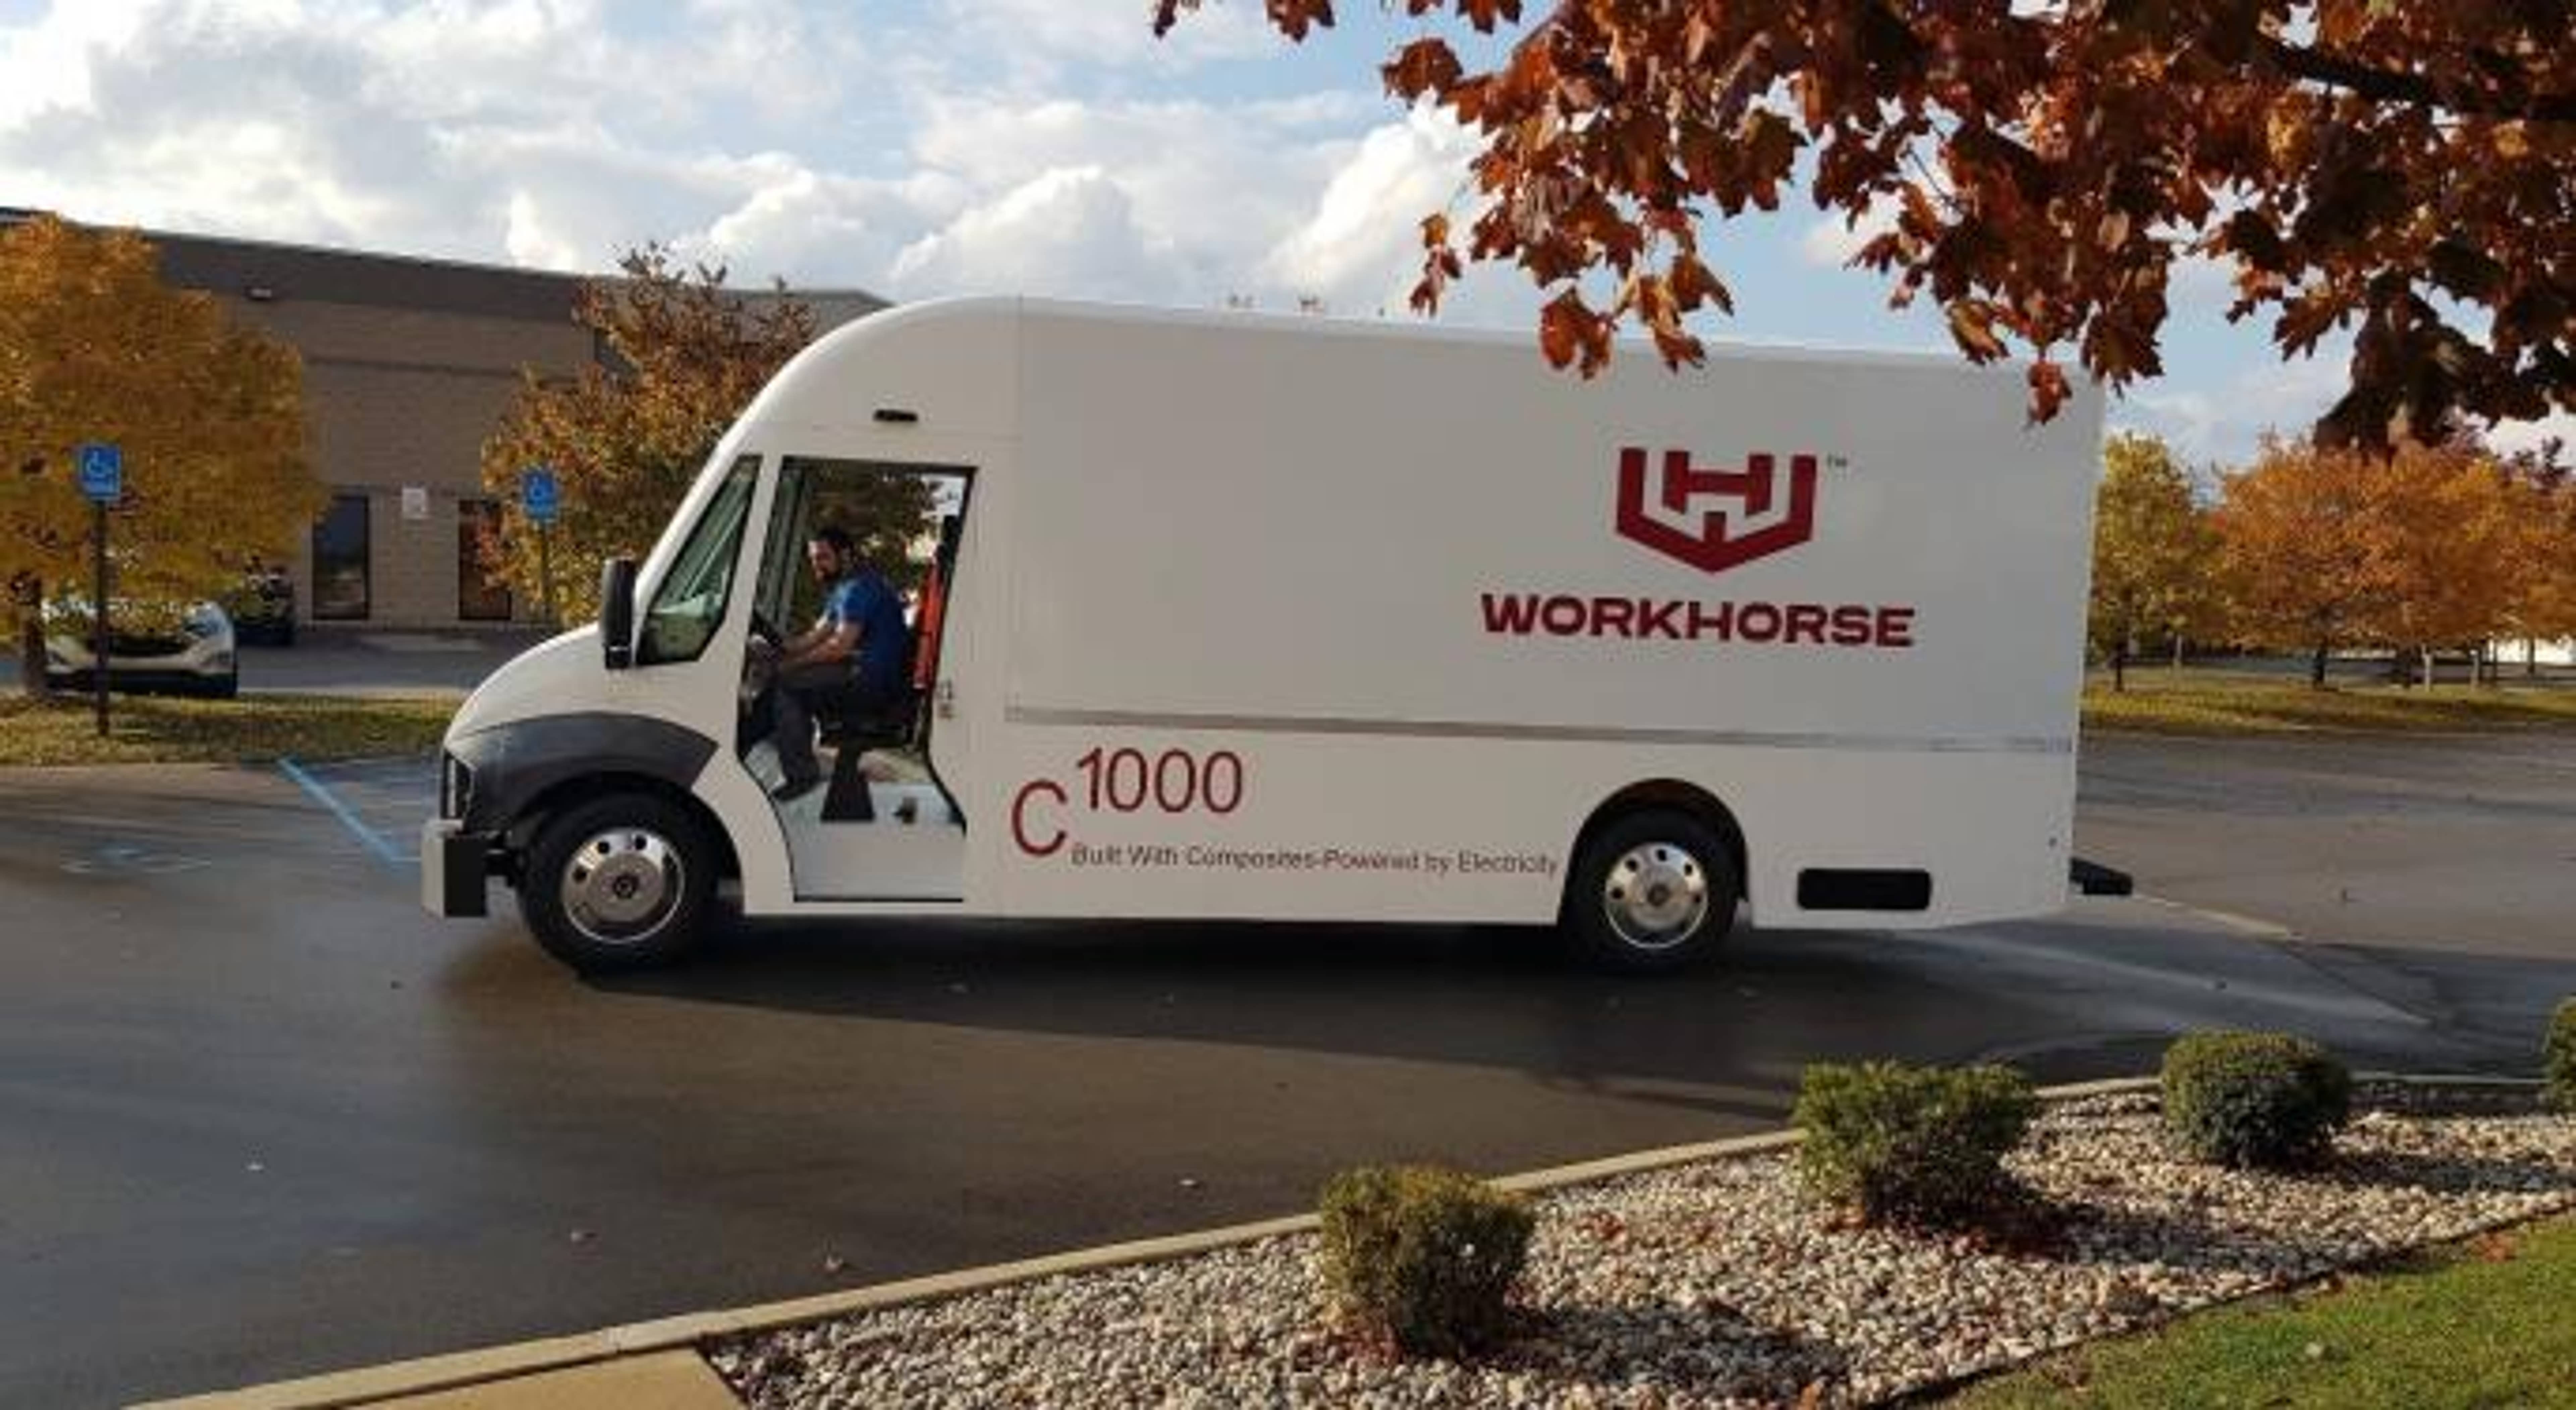 Cathie Wood Buys More Workhorse Shares On USPS Delay Sell-Off